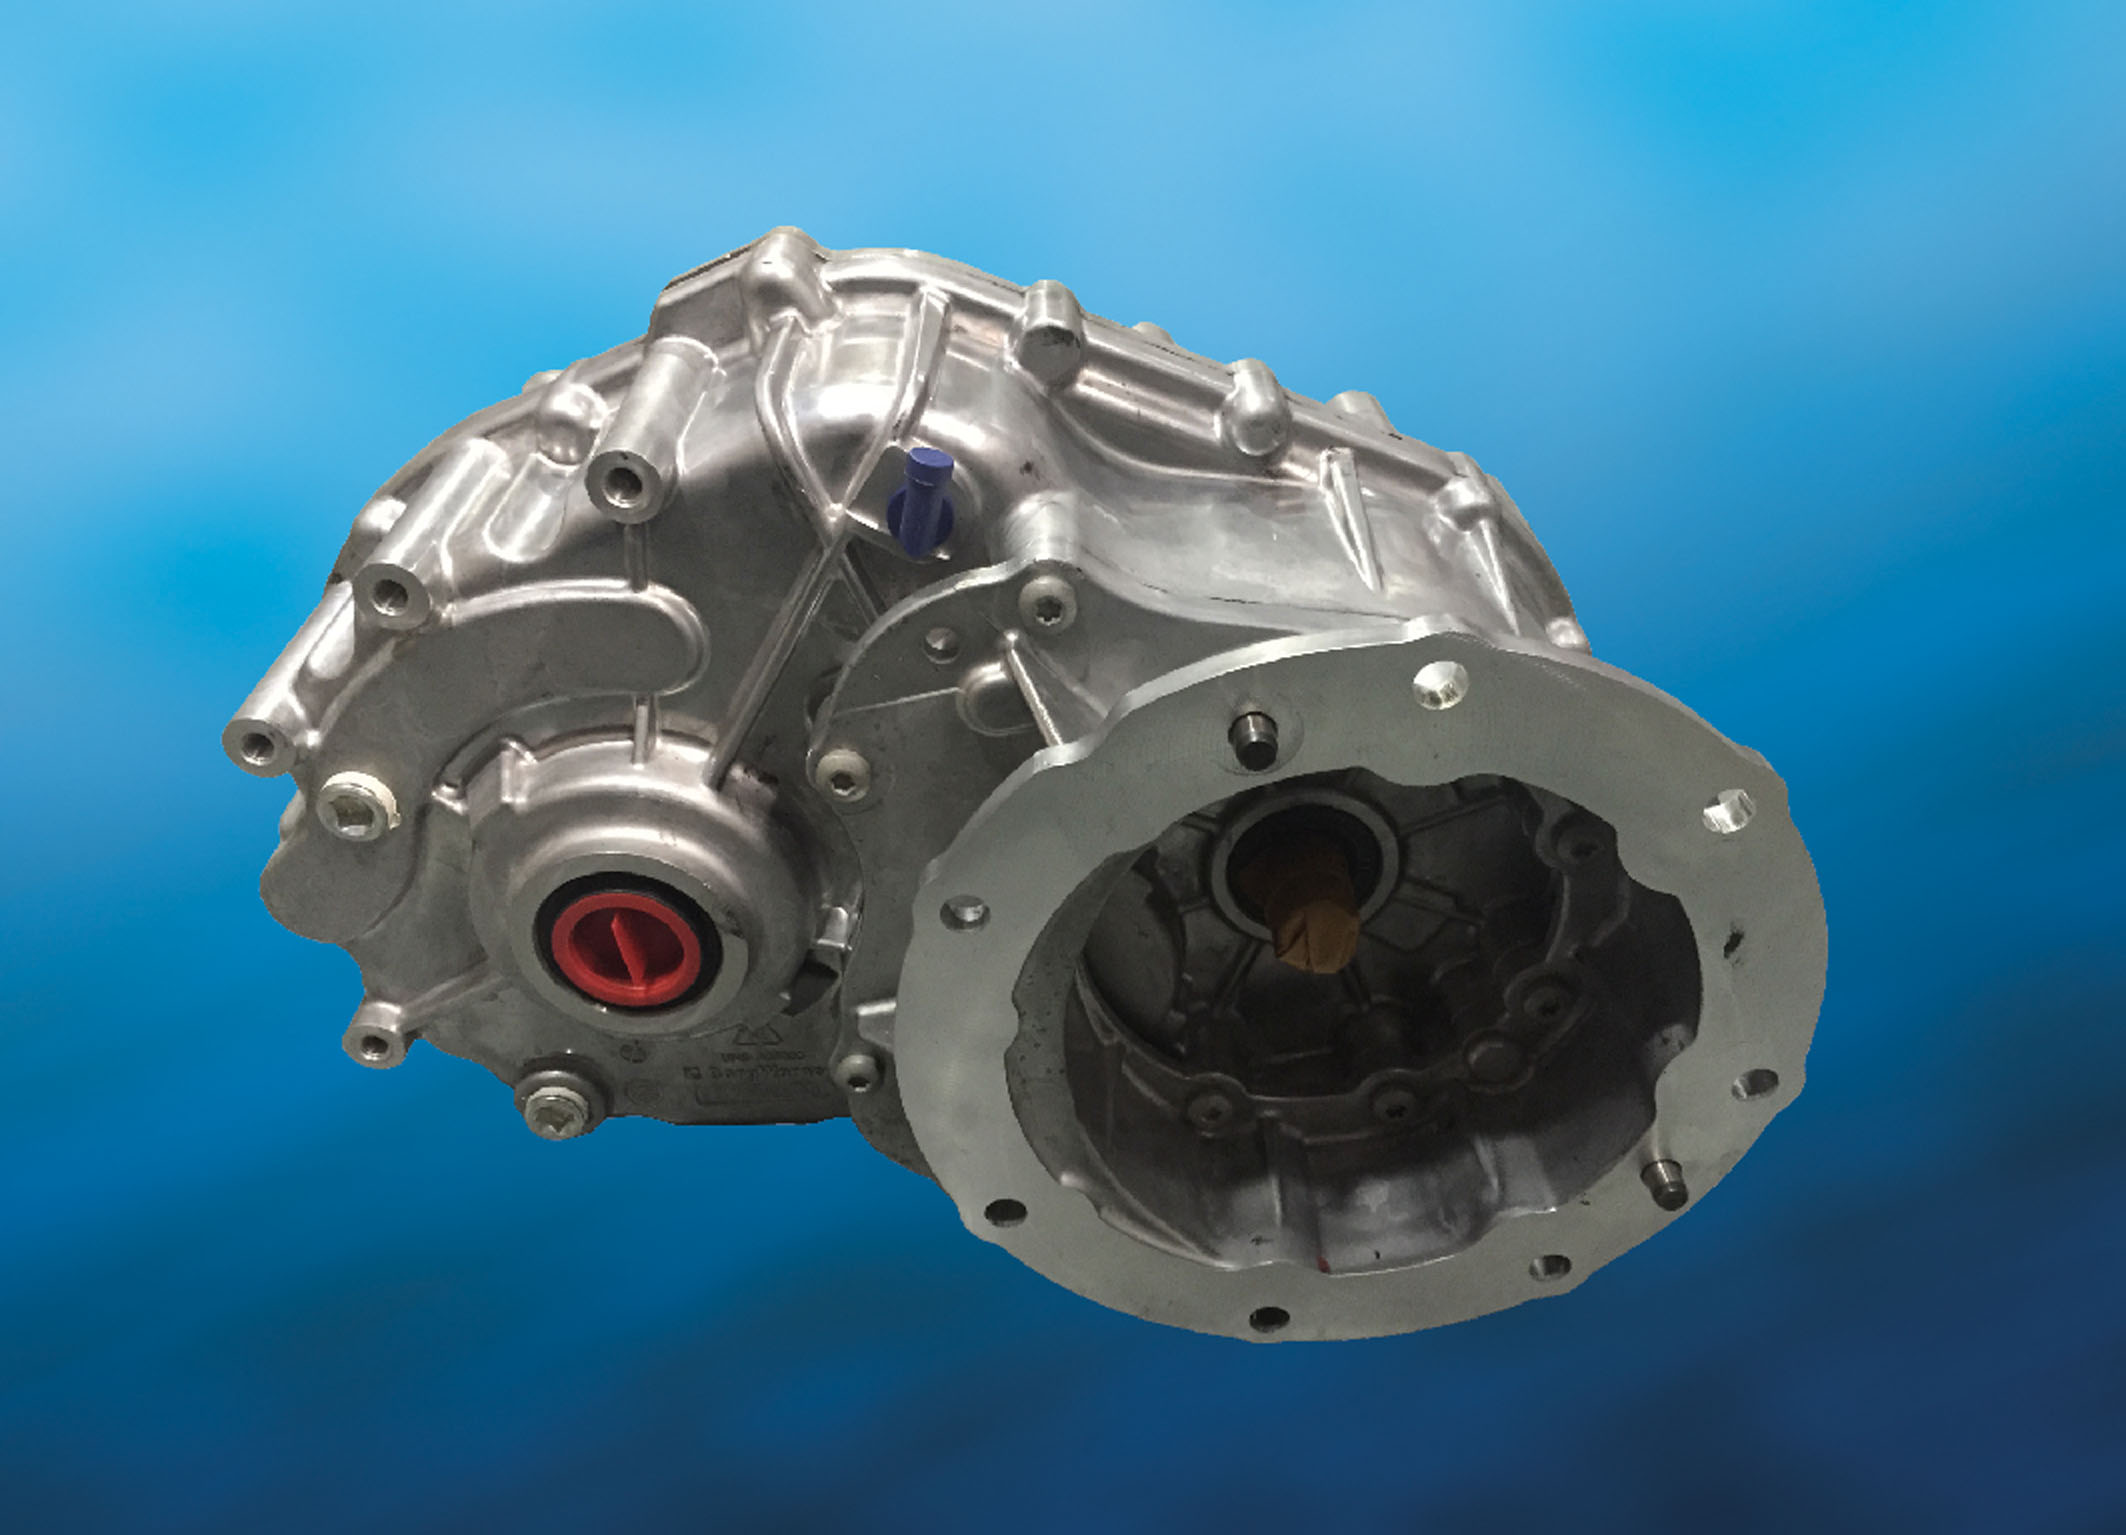 BorgWarner’s eGearDrive® transmission features a highly efficient gear train to provide extended range and quiet performance for electric vehicles.